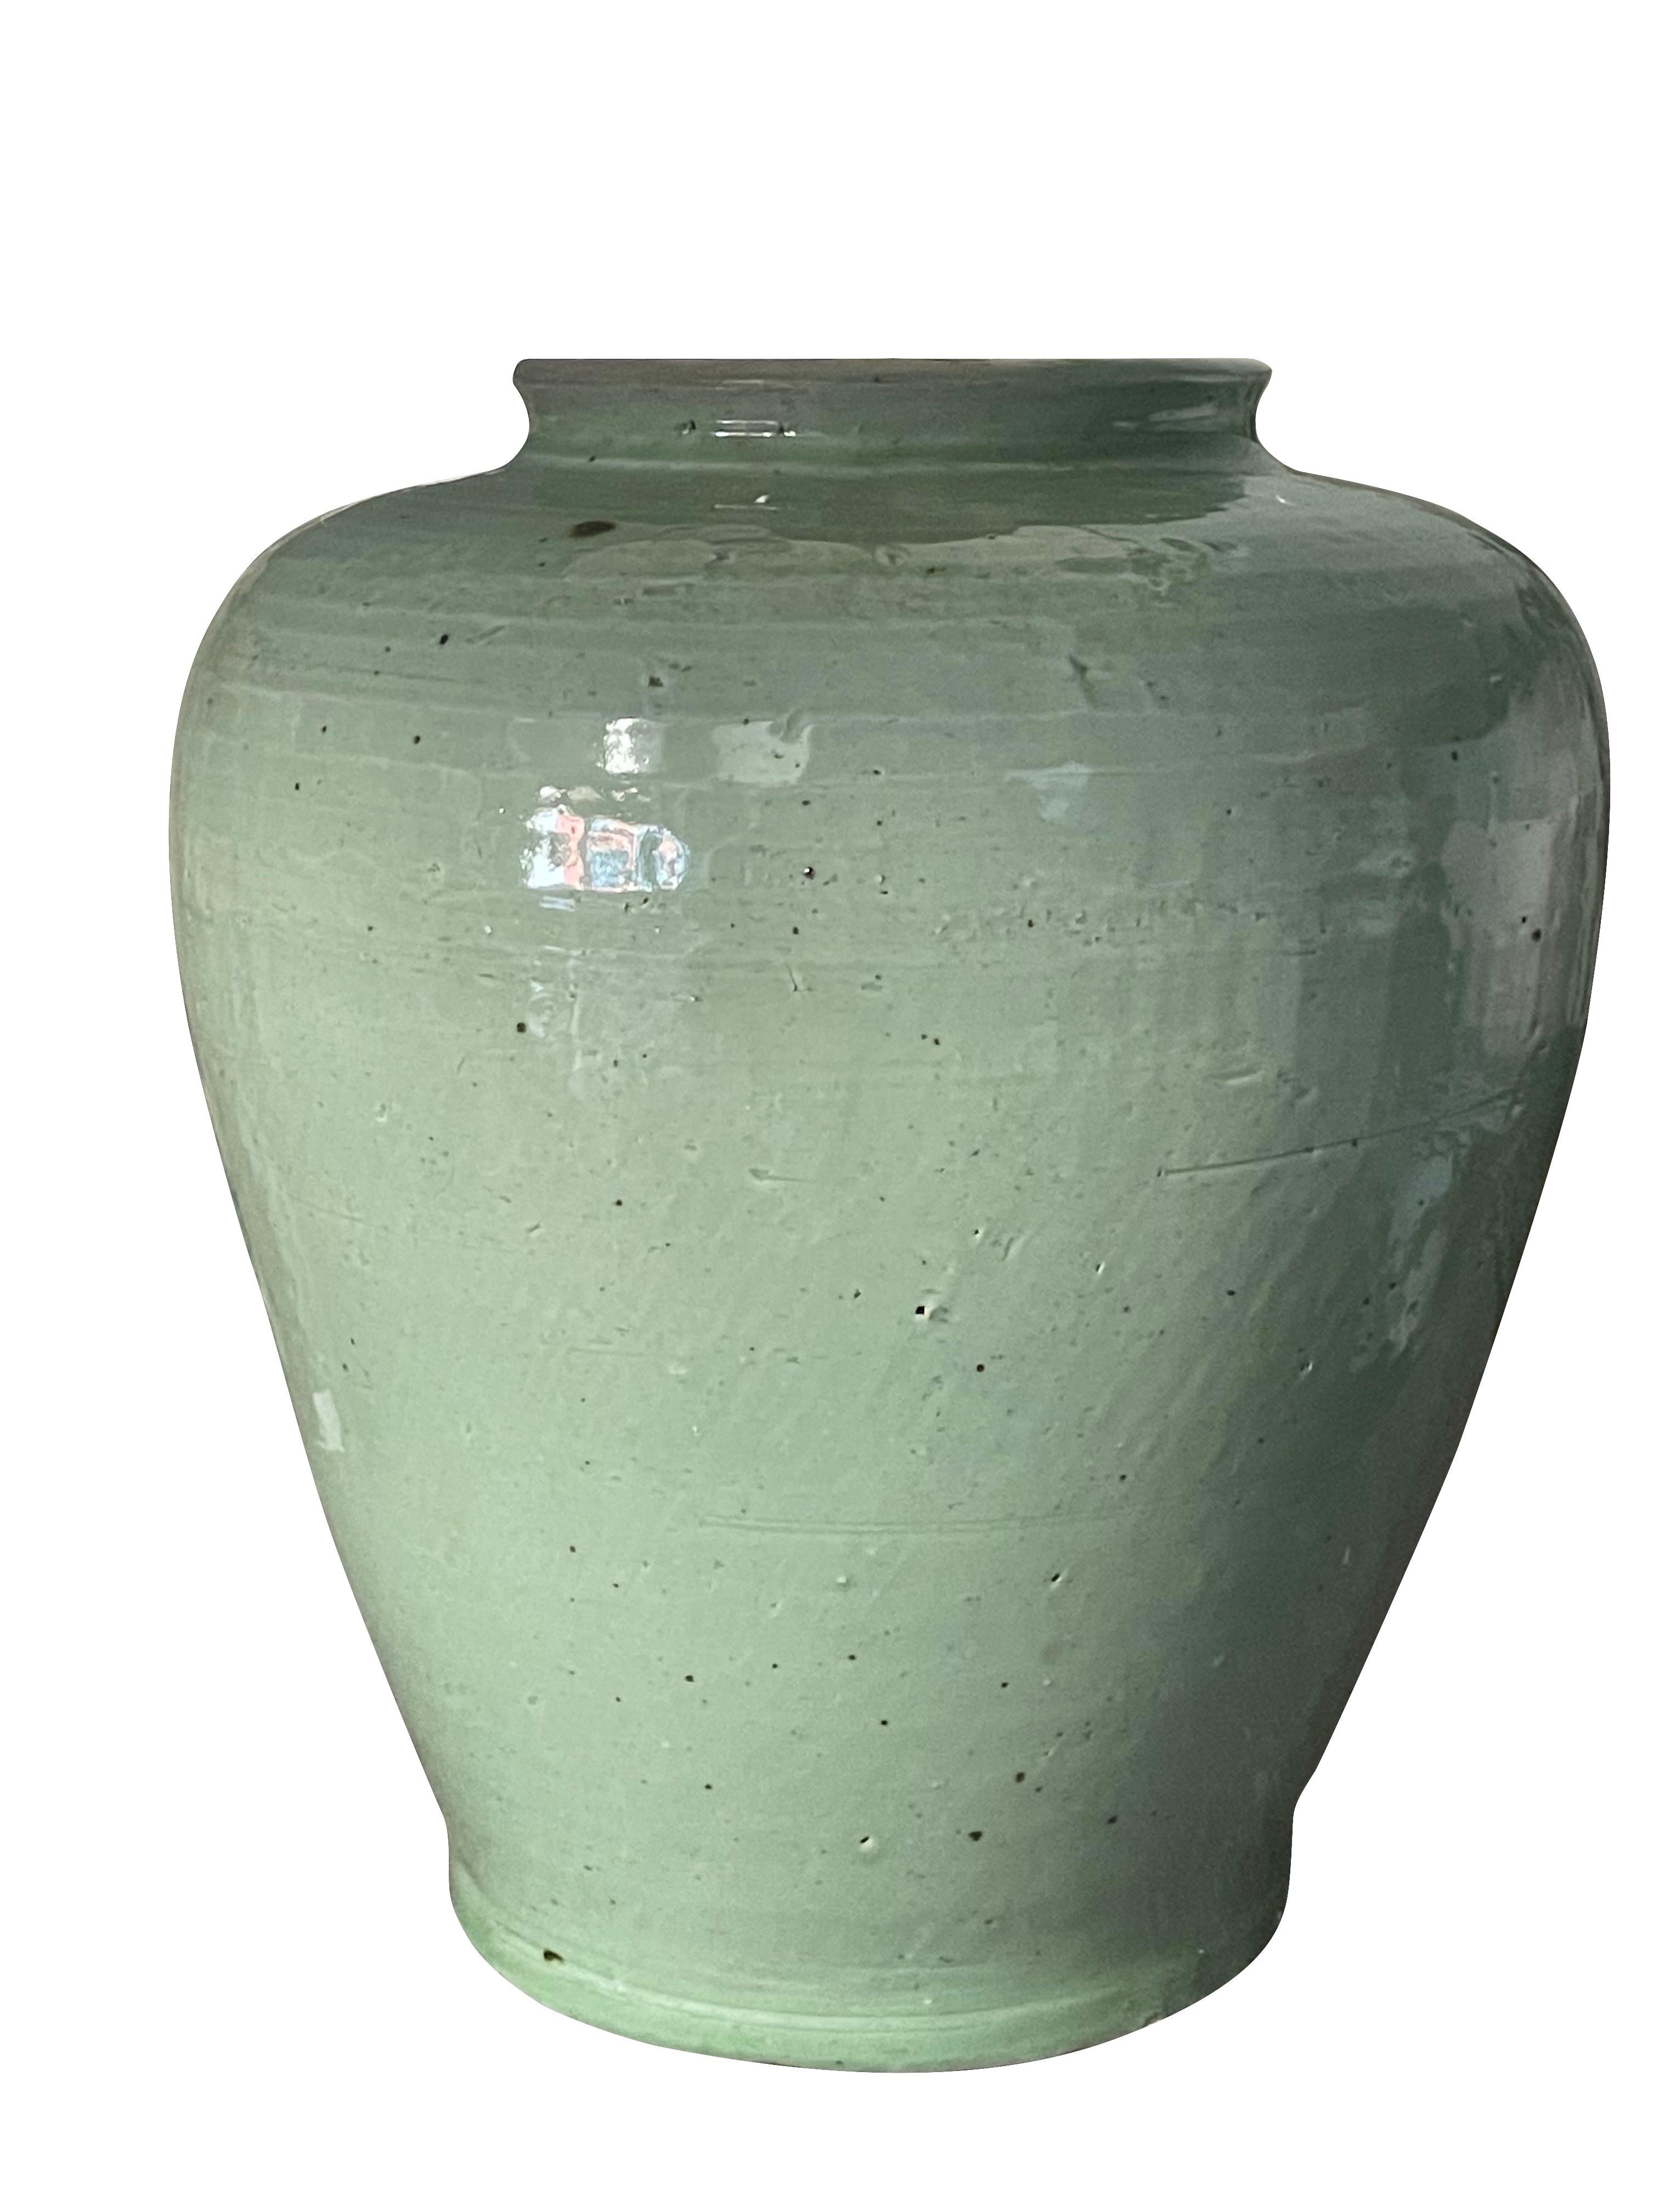 Contemporary Chinese pair of pale celadon glazed ceramic lamps
Ginger jar shape
Base measures 9 D x 11 H
Belgian linen shades
Shade diameter 17.5